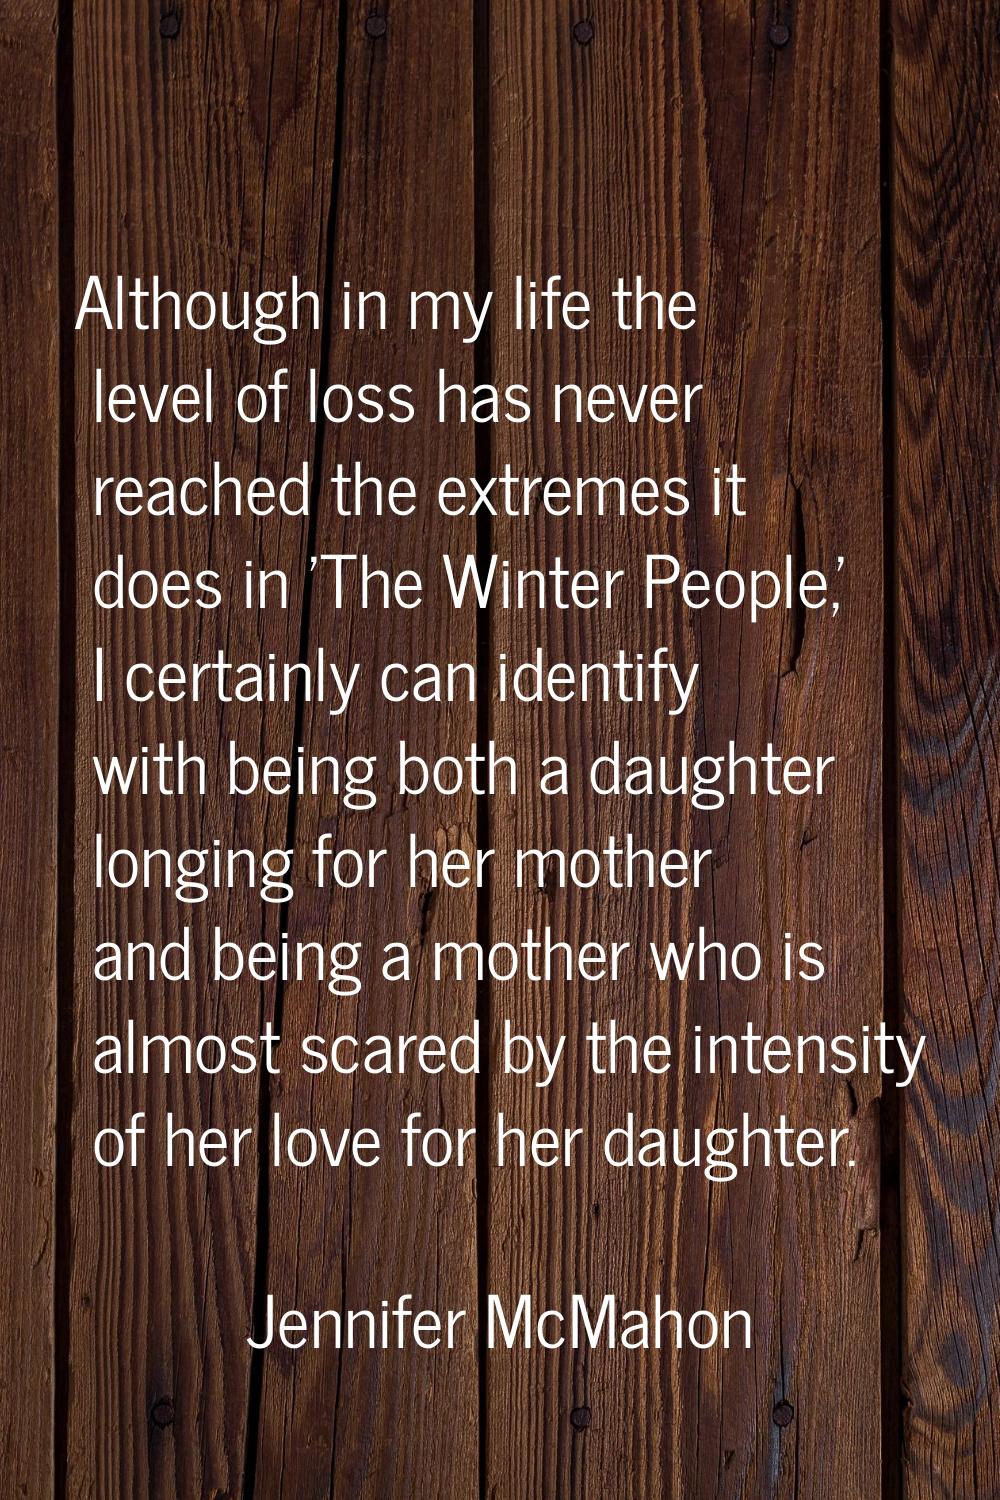 Although in my life the level of loss has never reached the extremes it does in 'The Winter People,